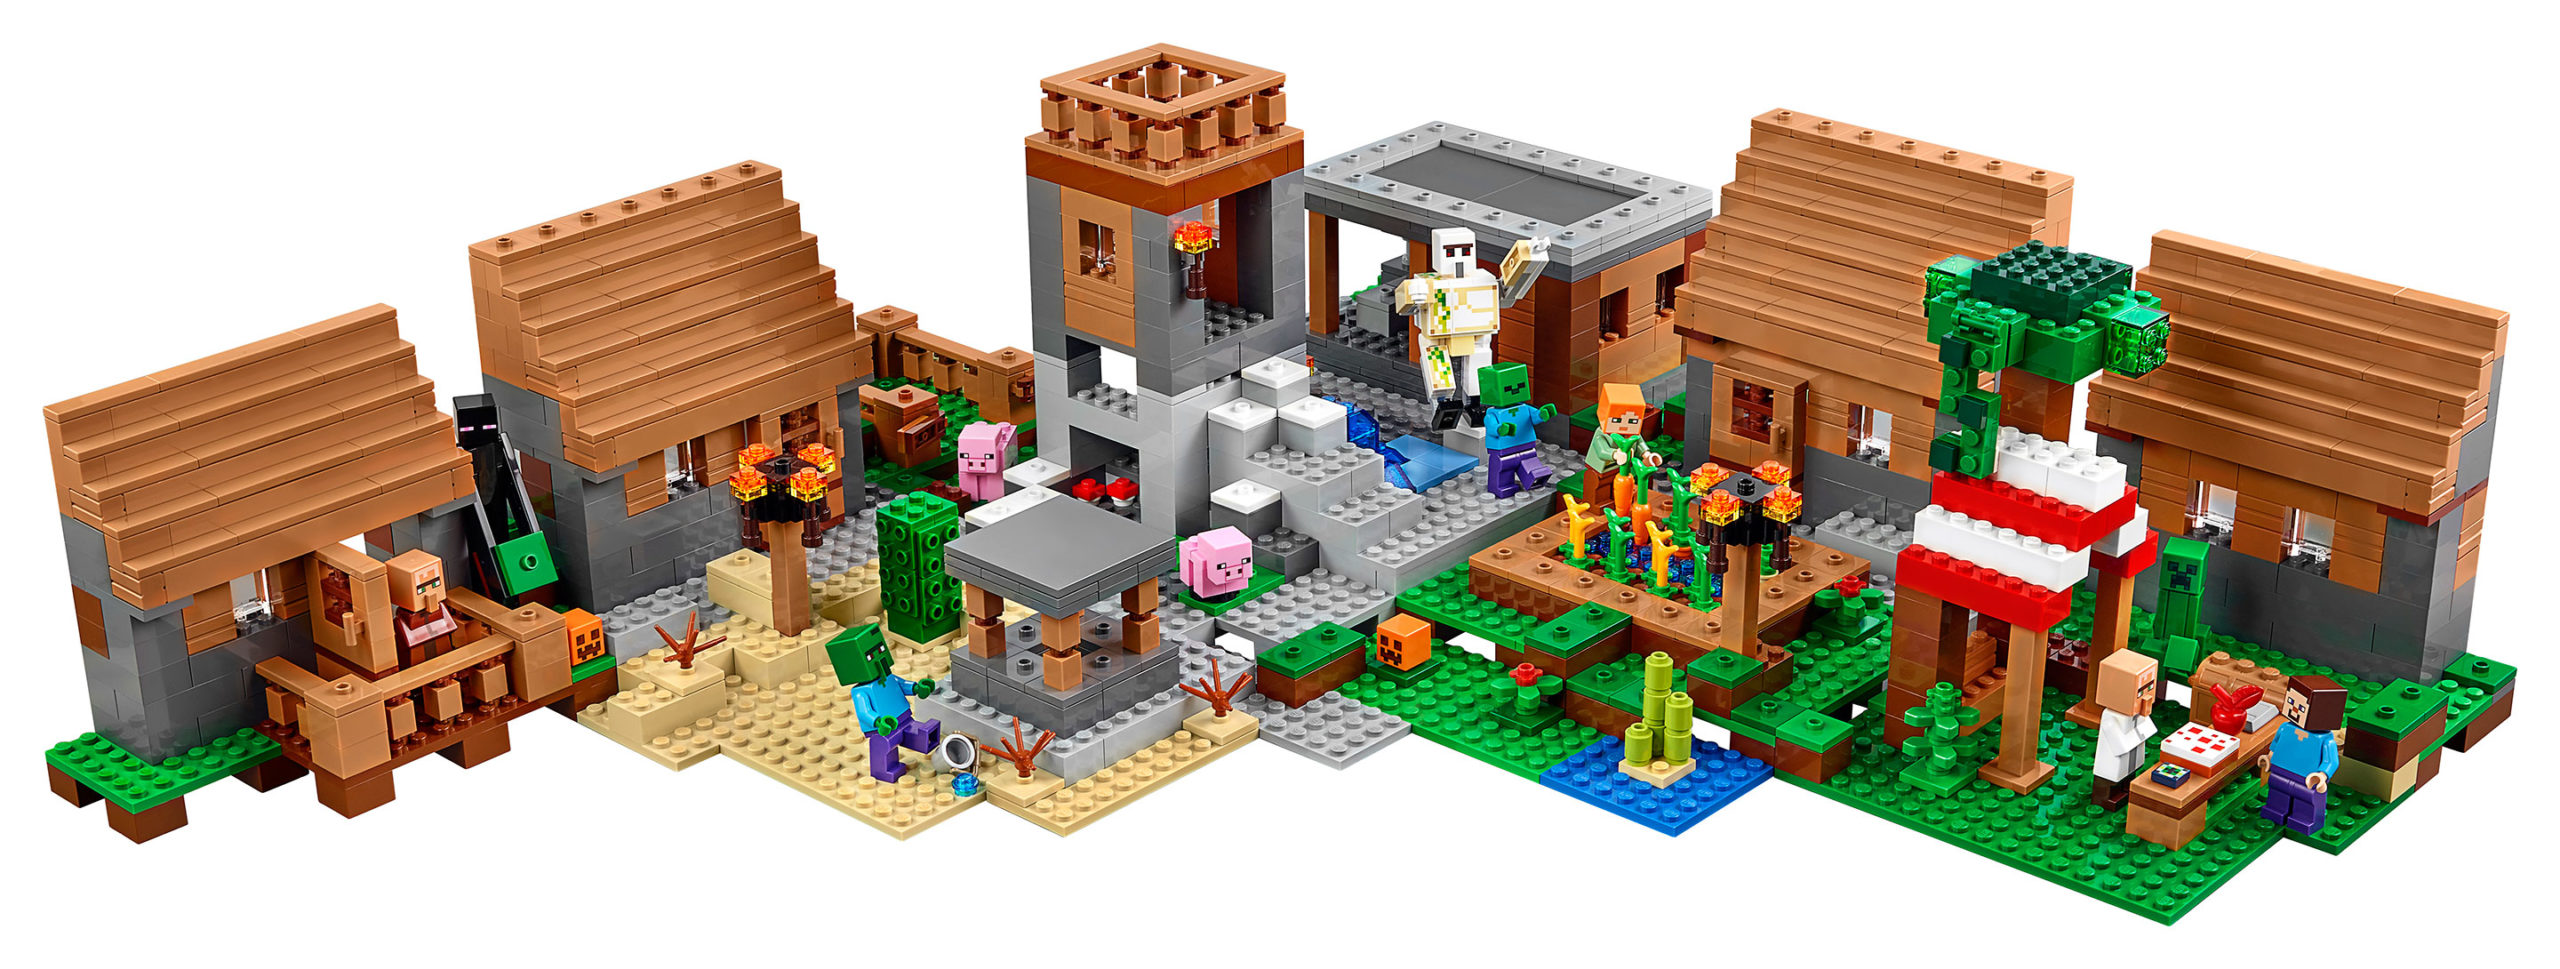 The Village Is The Biggest Official LEGO Minecraft Set Yet